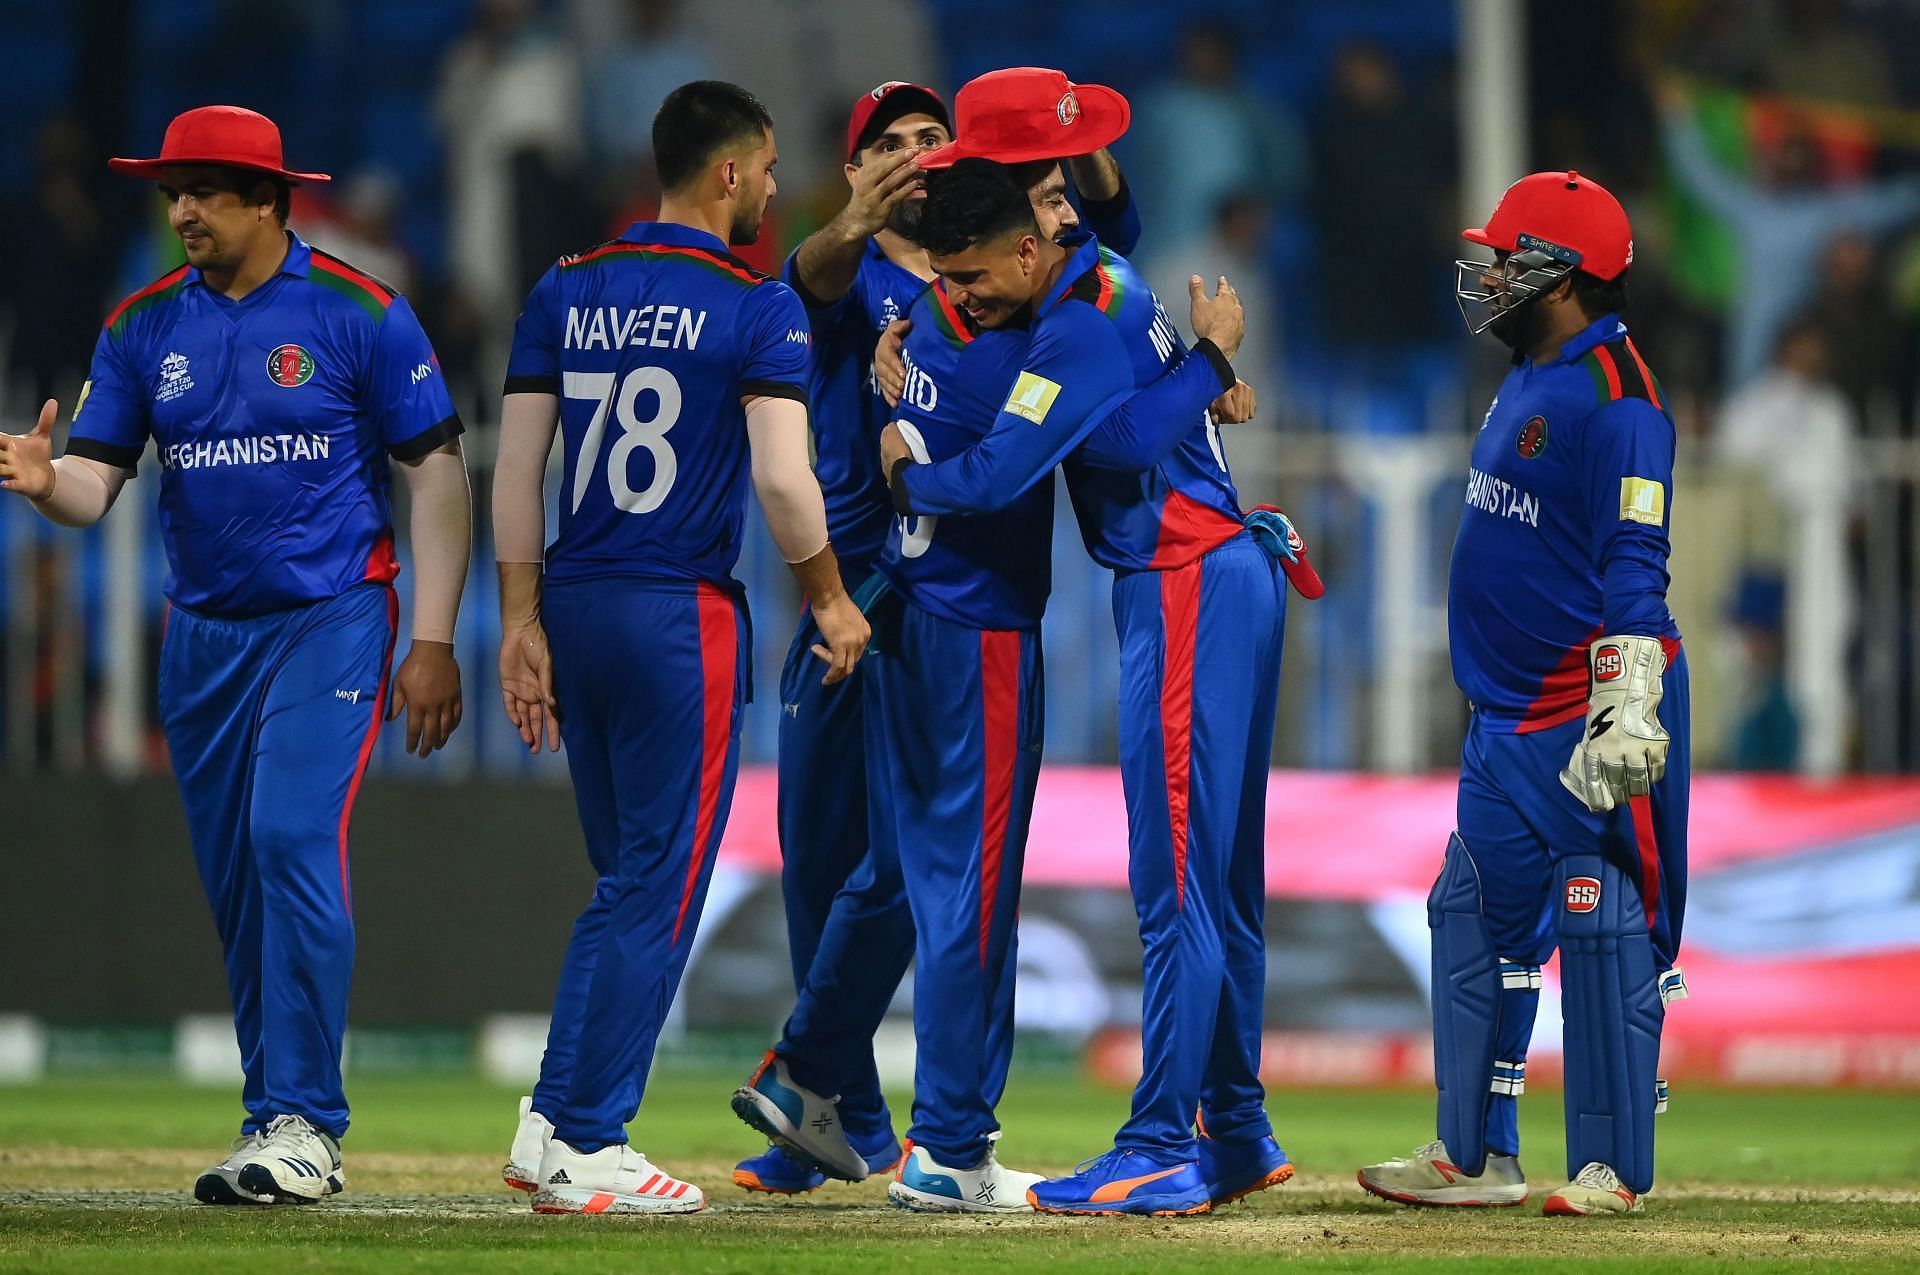 The Afghanistan cricket team in action (Image courtesy: Getty Images)